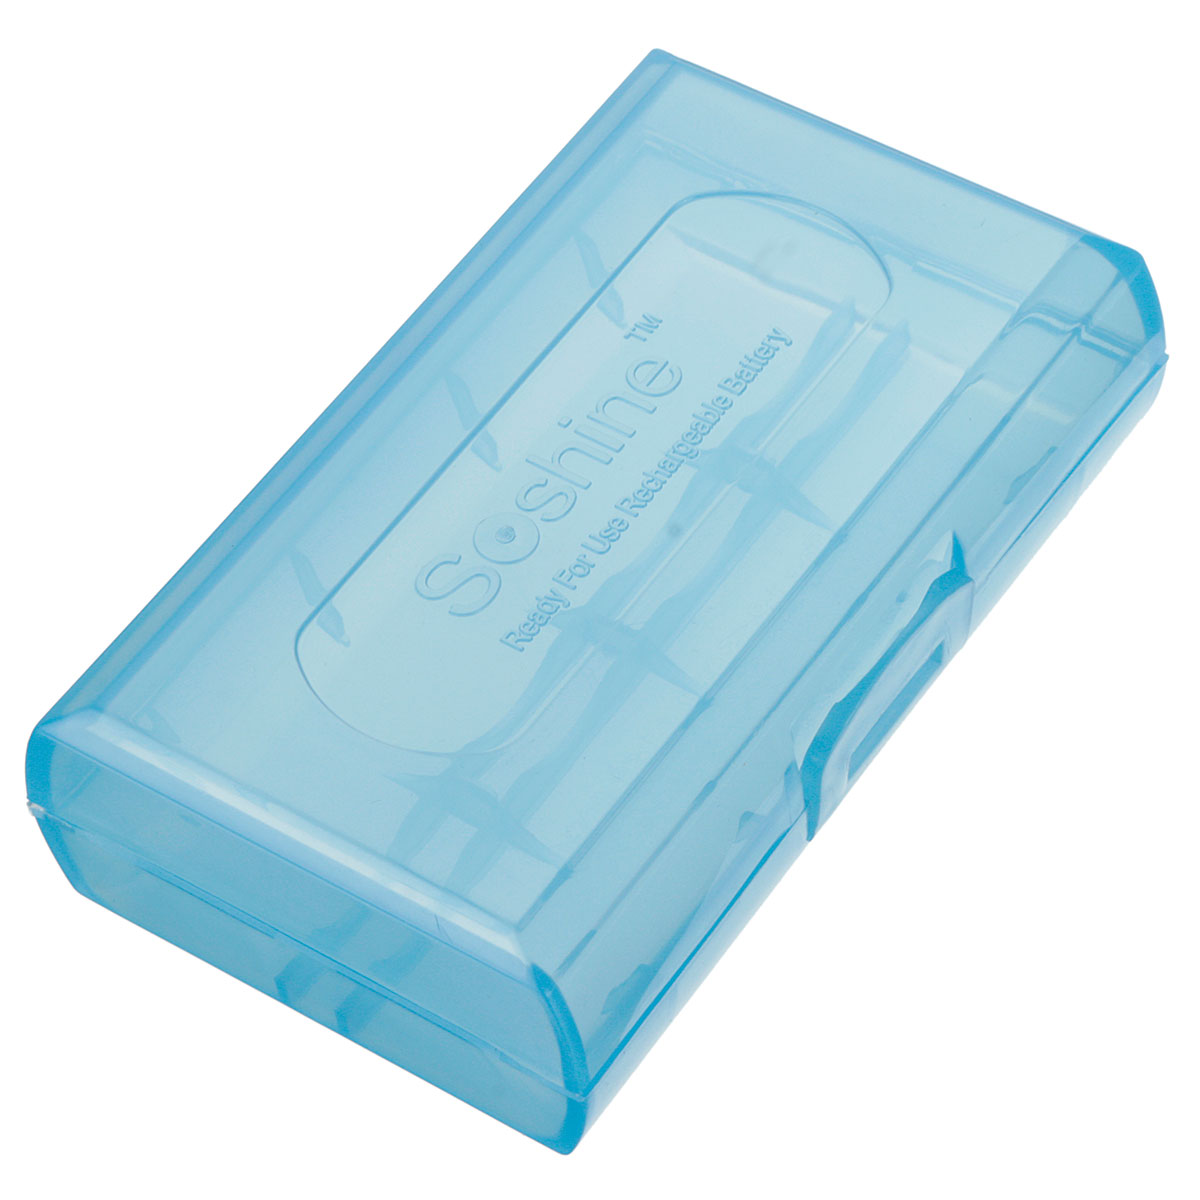 12X-Plastic-Dual-Sleeve-Cover-Case-Storage-Box-for-18650-16340CR123A-Battery-1963674-5